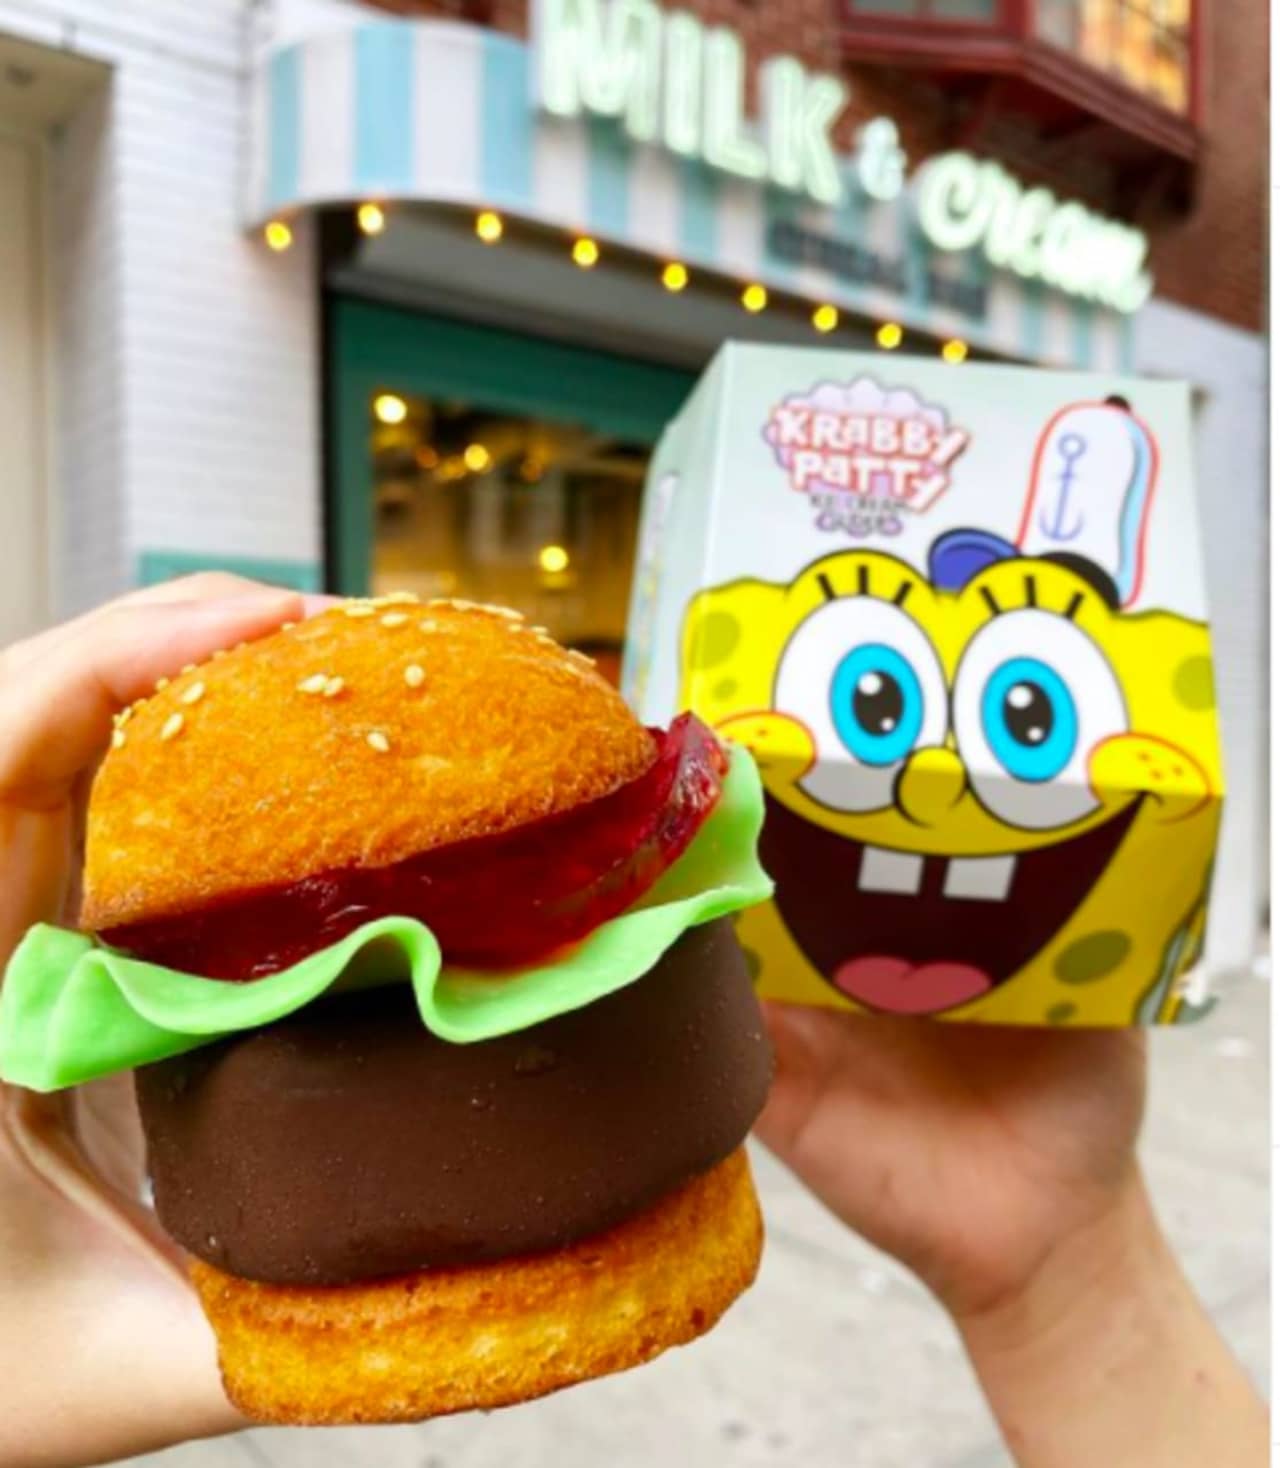 The Krabby Patty from Milk & Cream Cereal Bar comes in a special "Spongebob" box.